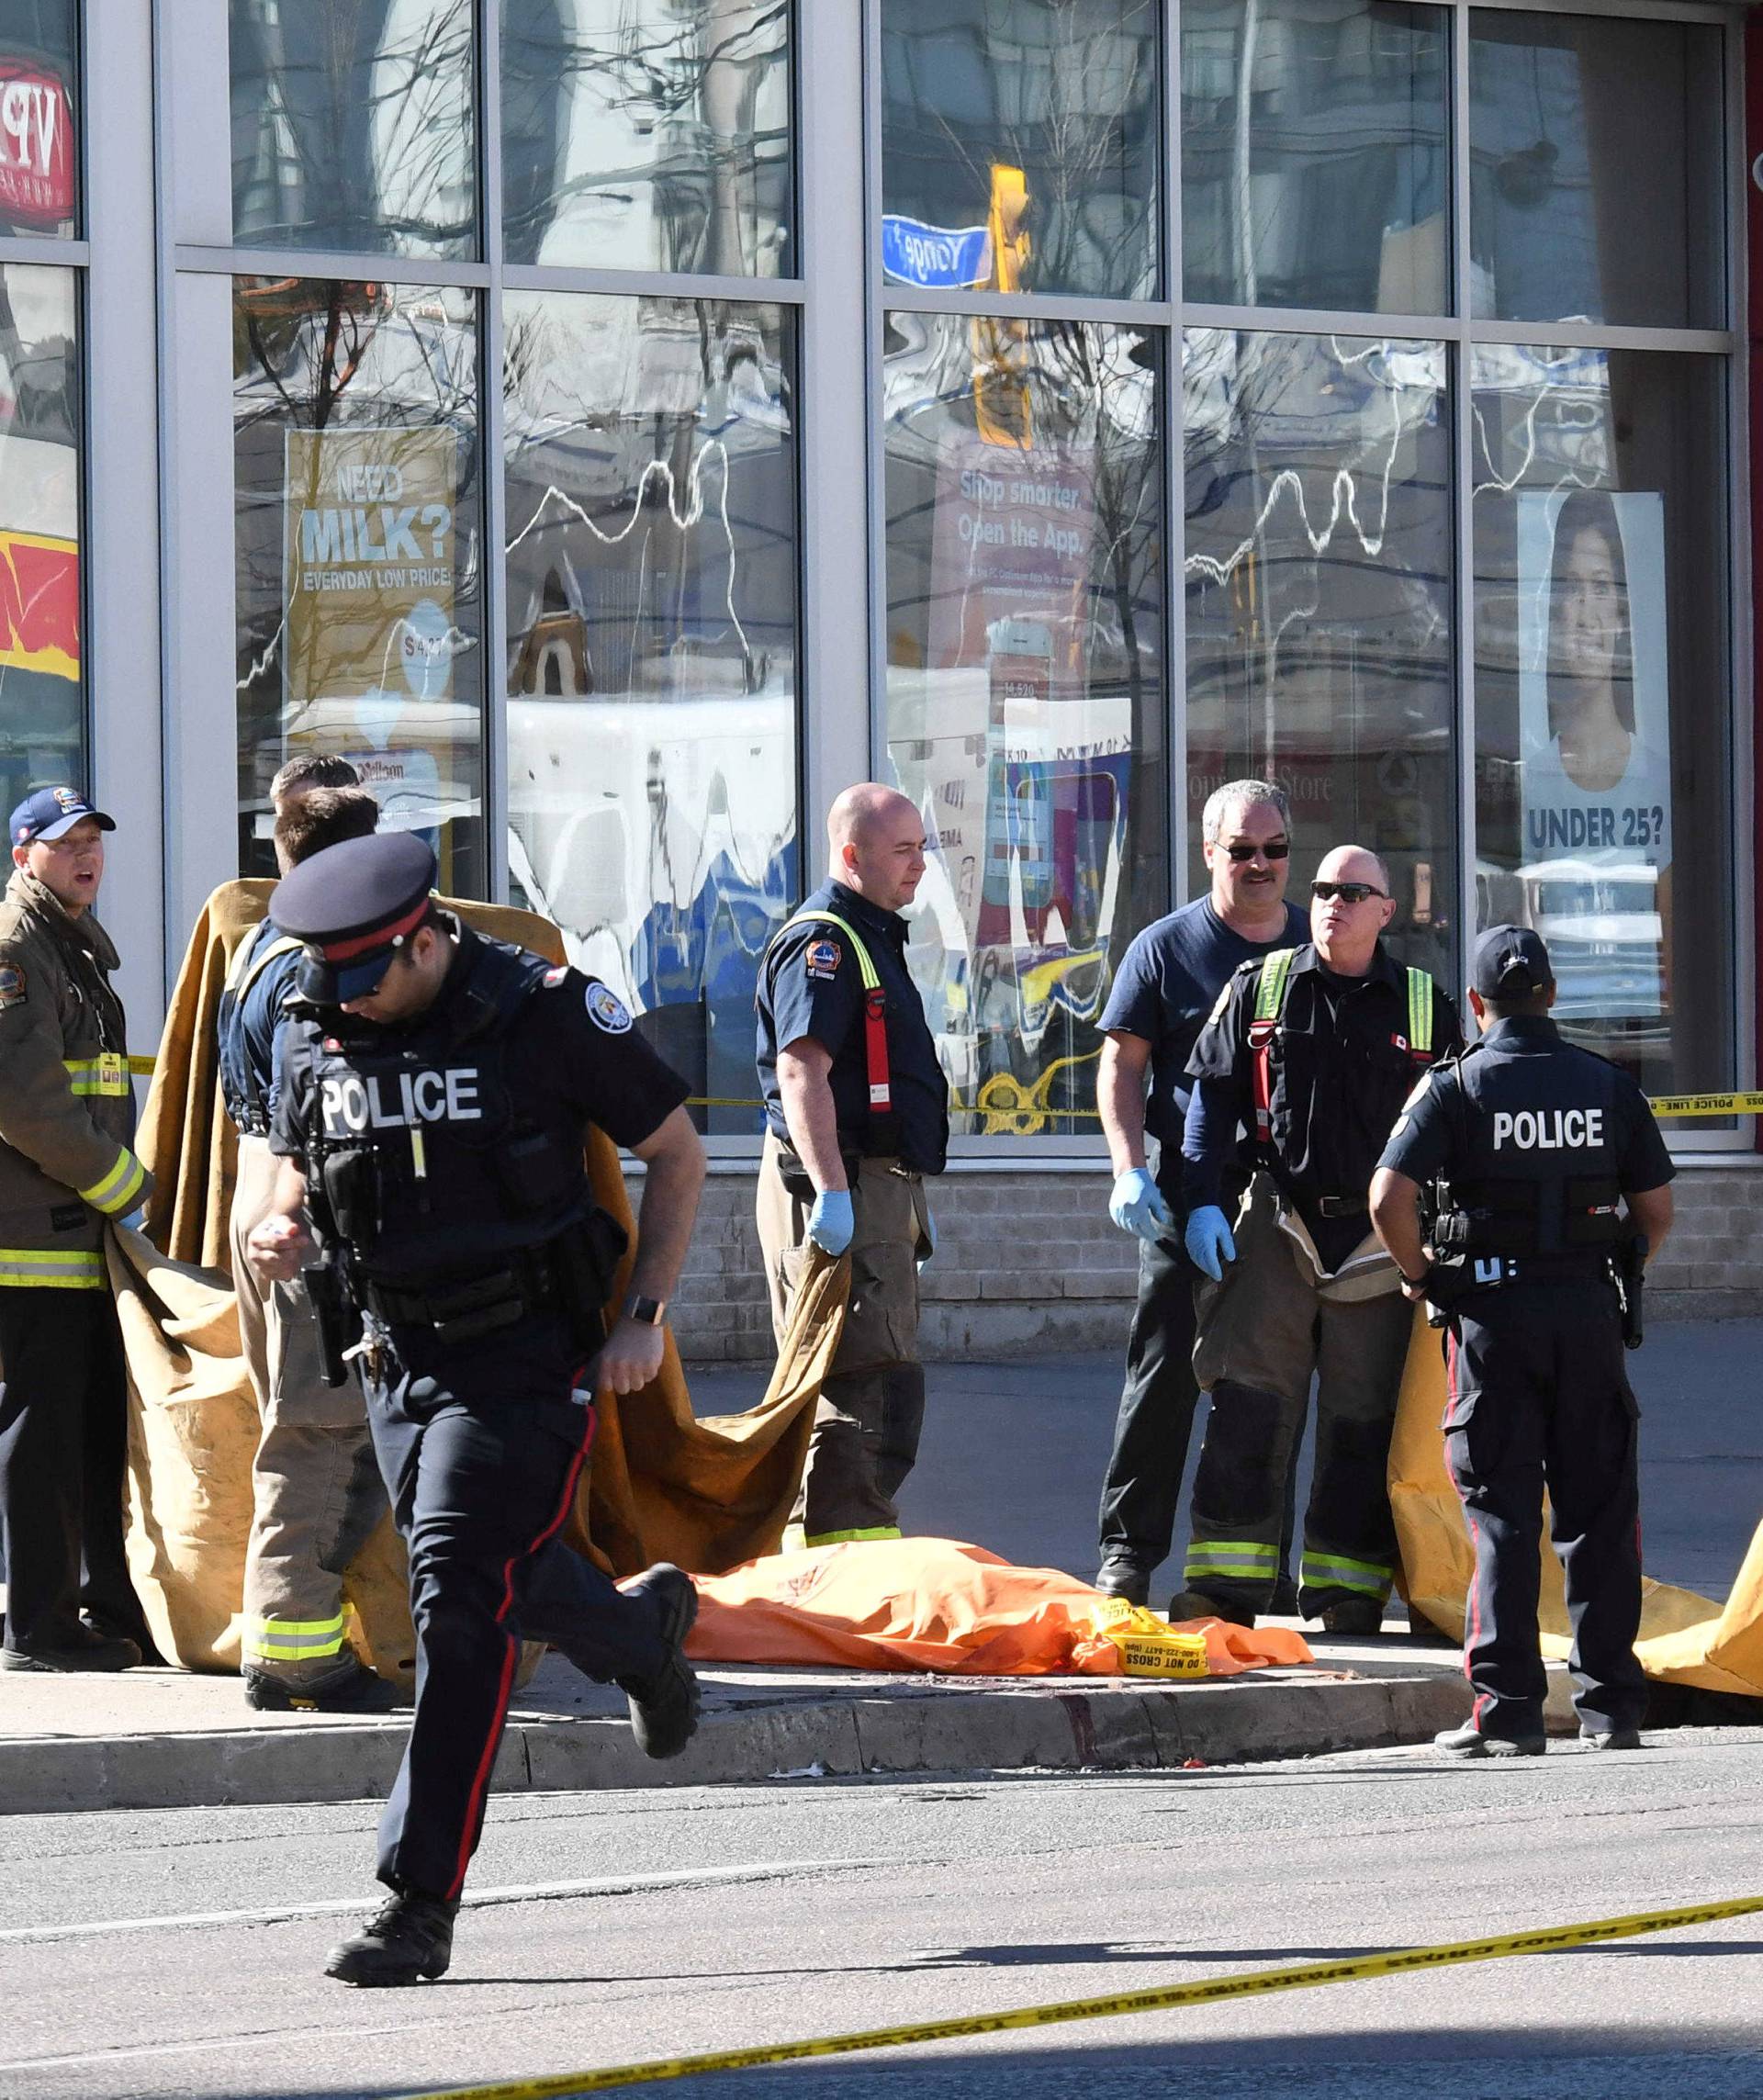 Fire fighters stand near a covered body after a van struck multiple people at a major intersection northern Toronto